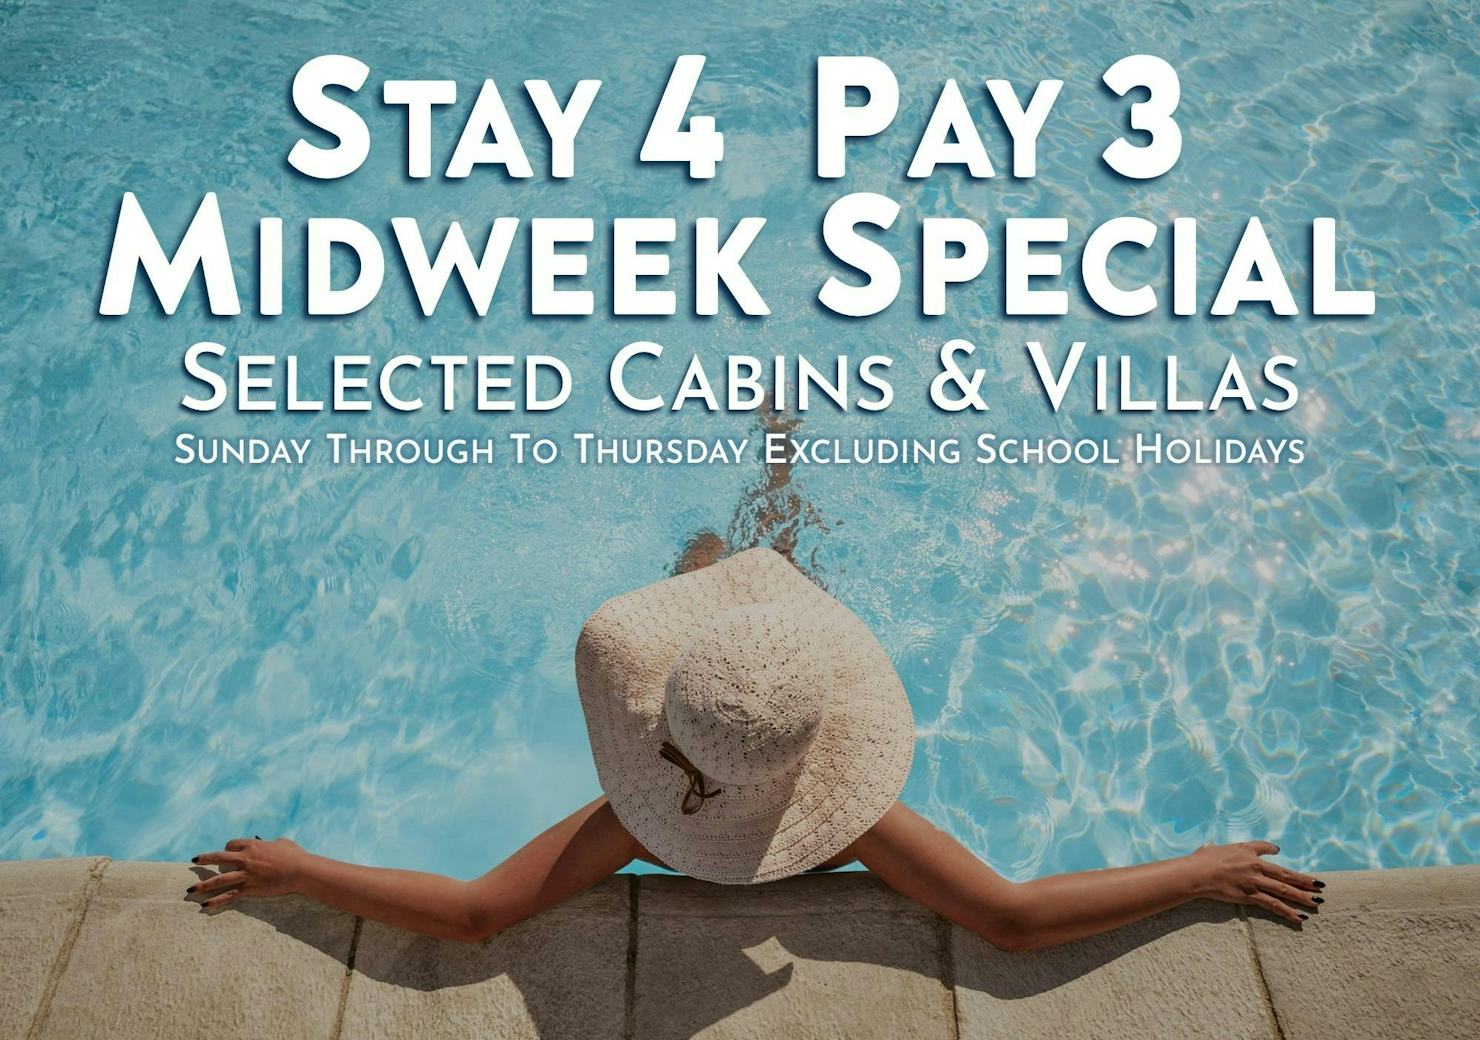 Stay 4 Pay 3 Midweek Special